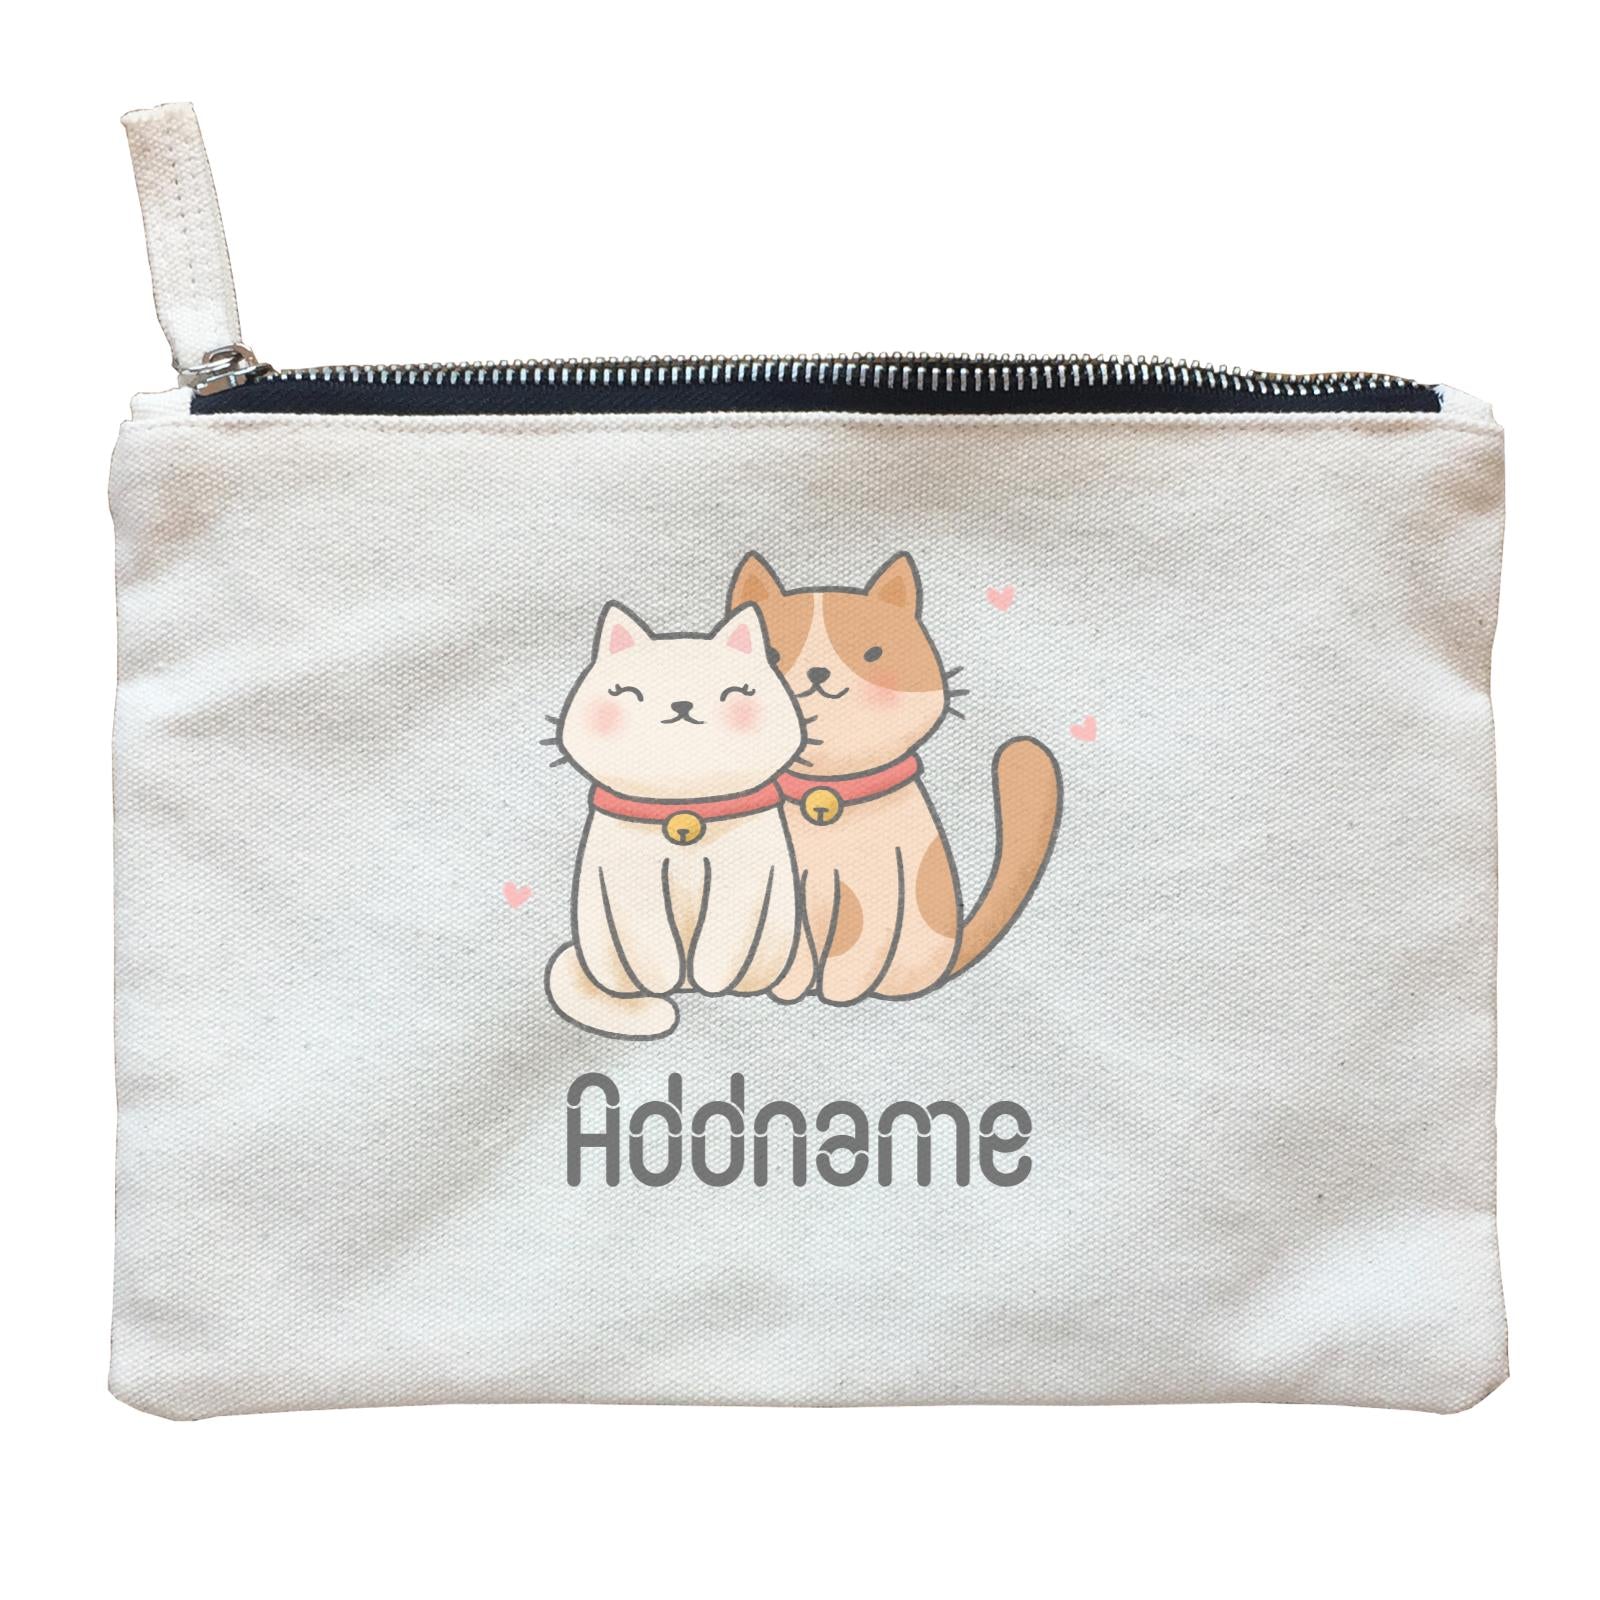 Cute Hand Drawn Style Couple Cat Addname Zipper Pouch